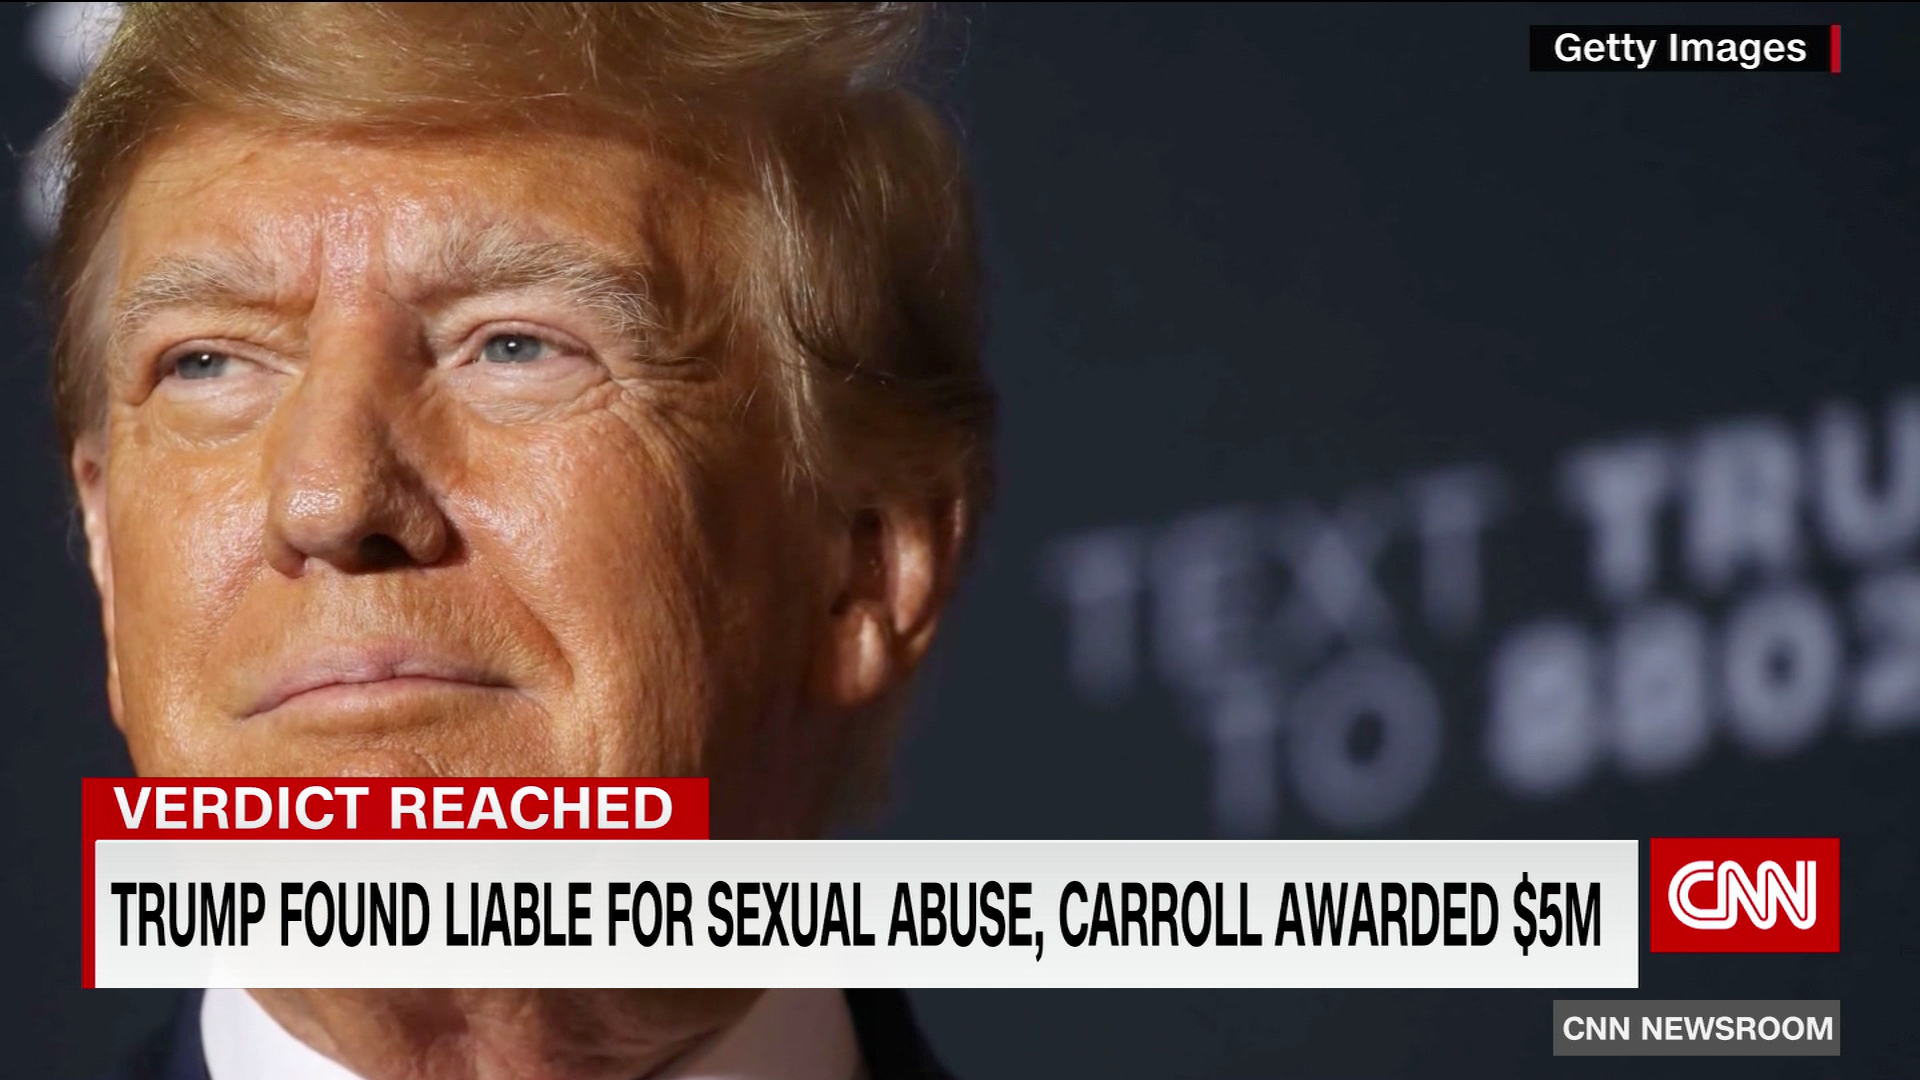 Donald Trump found liable for sex abuse.